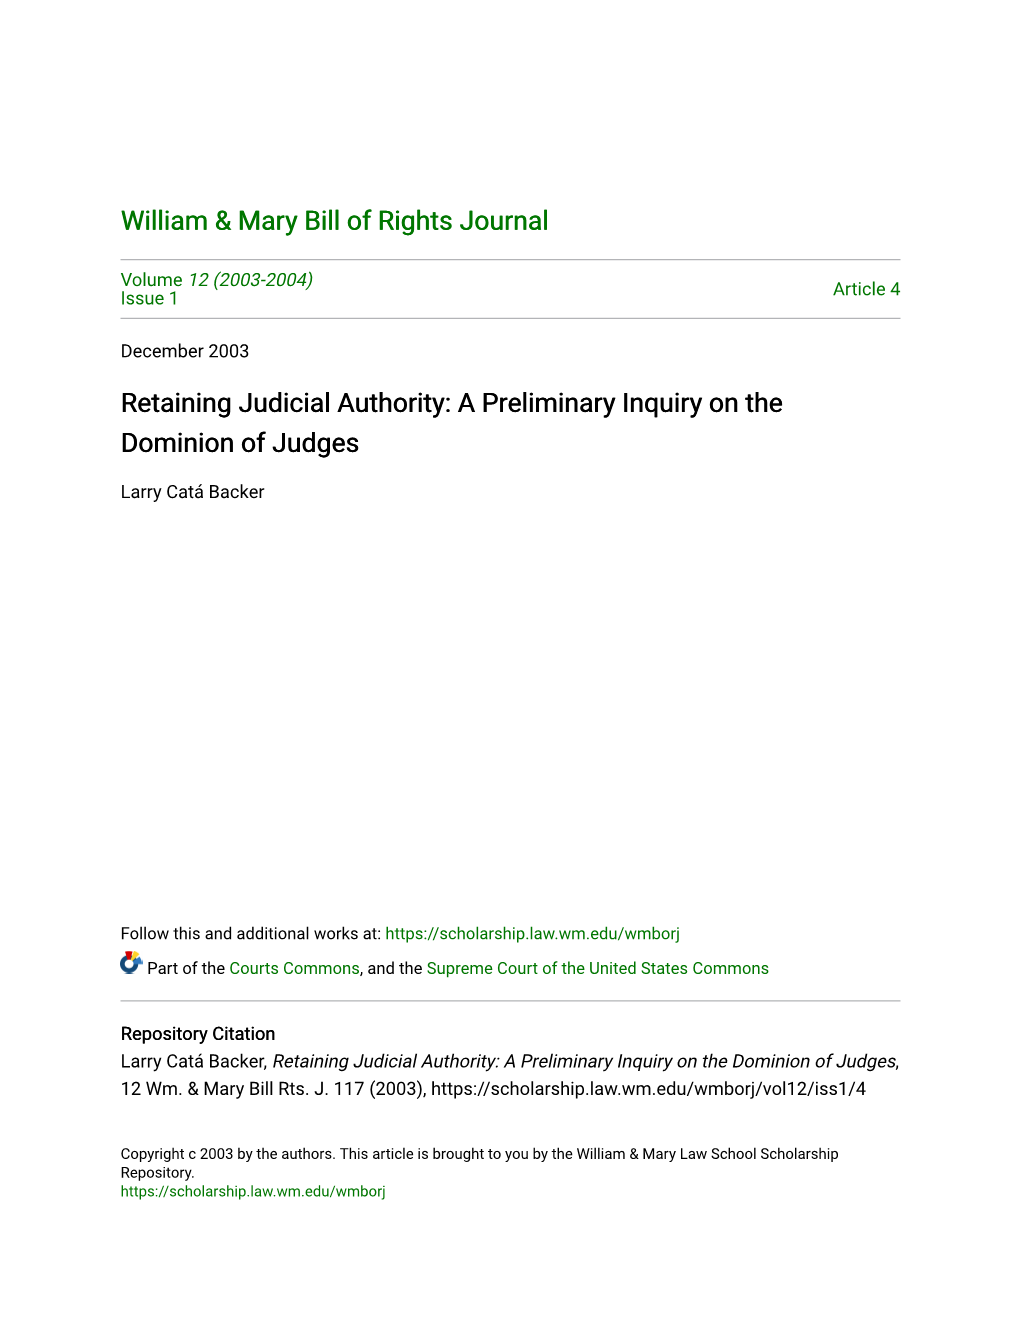 Retaining Judicial Authority: a Preliminary Inquiry on the Dominion of Judges